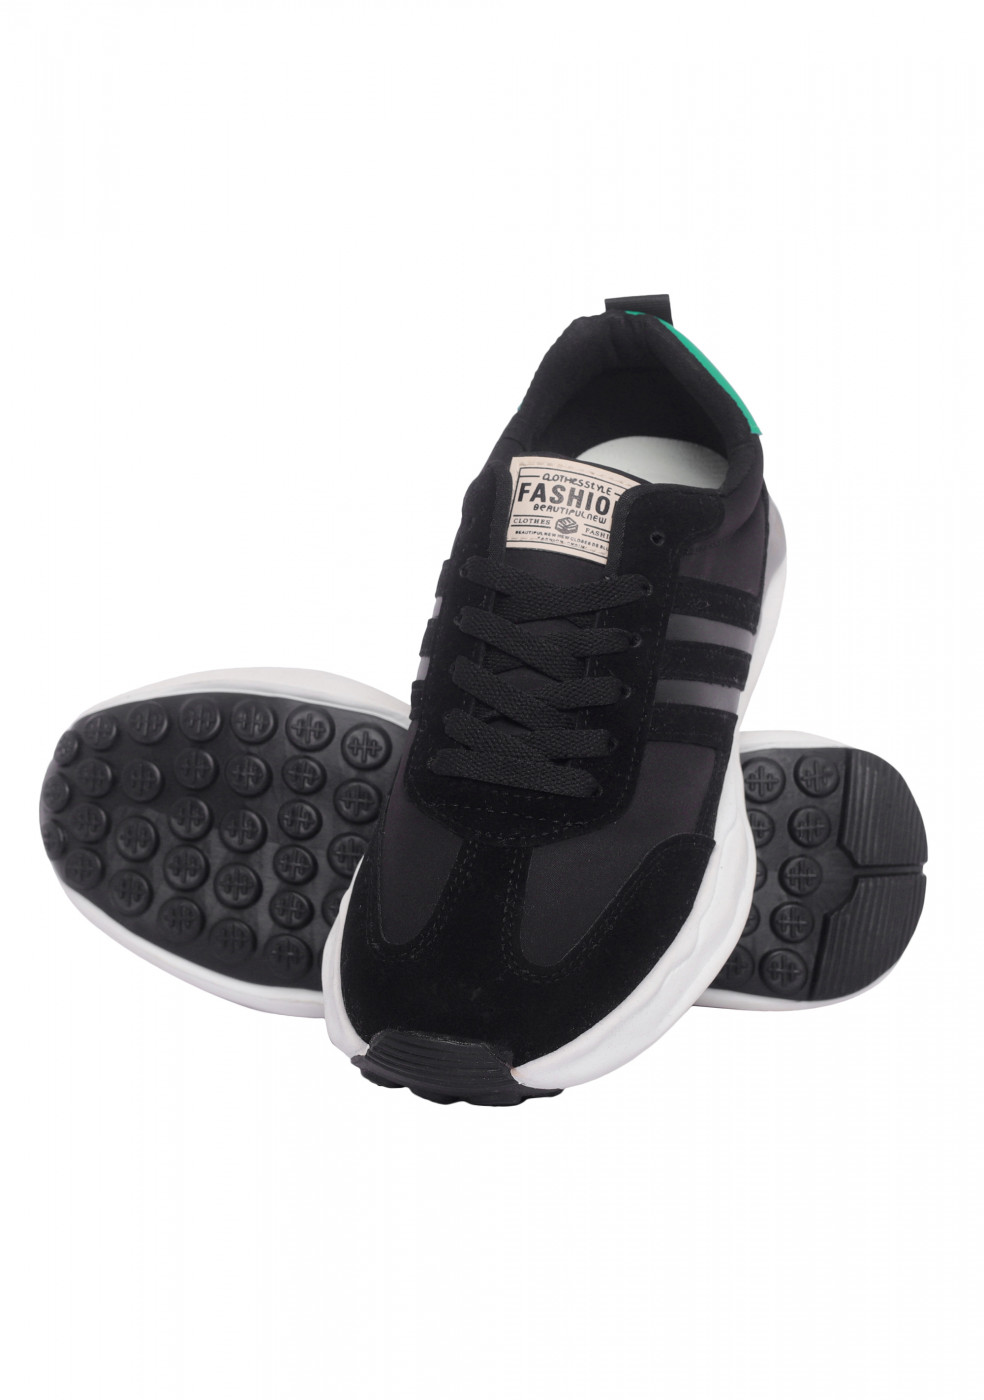 CEFIRO Black Sneakers Shoes For Men